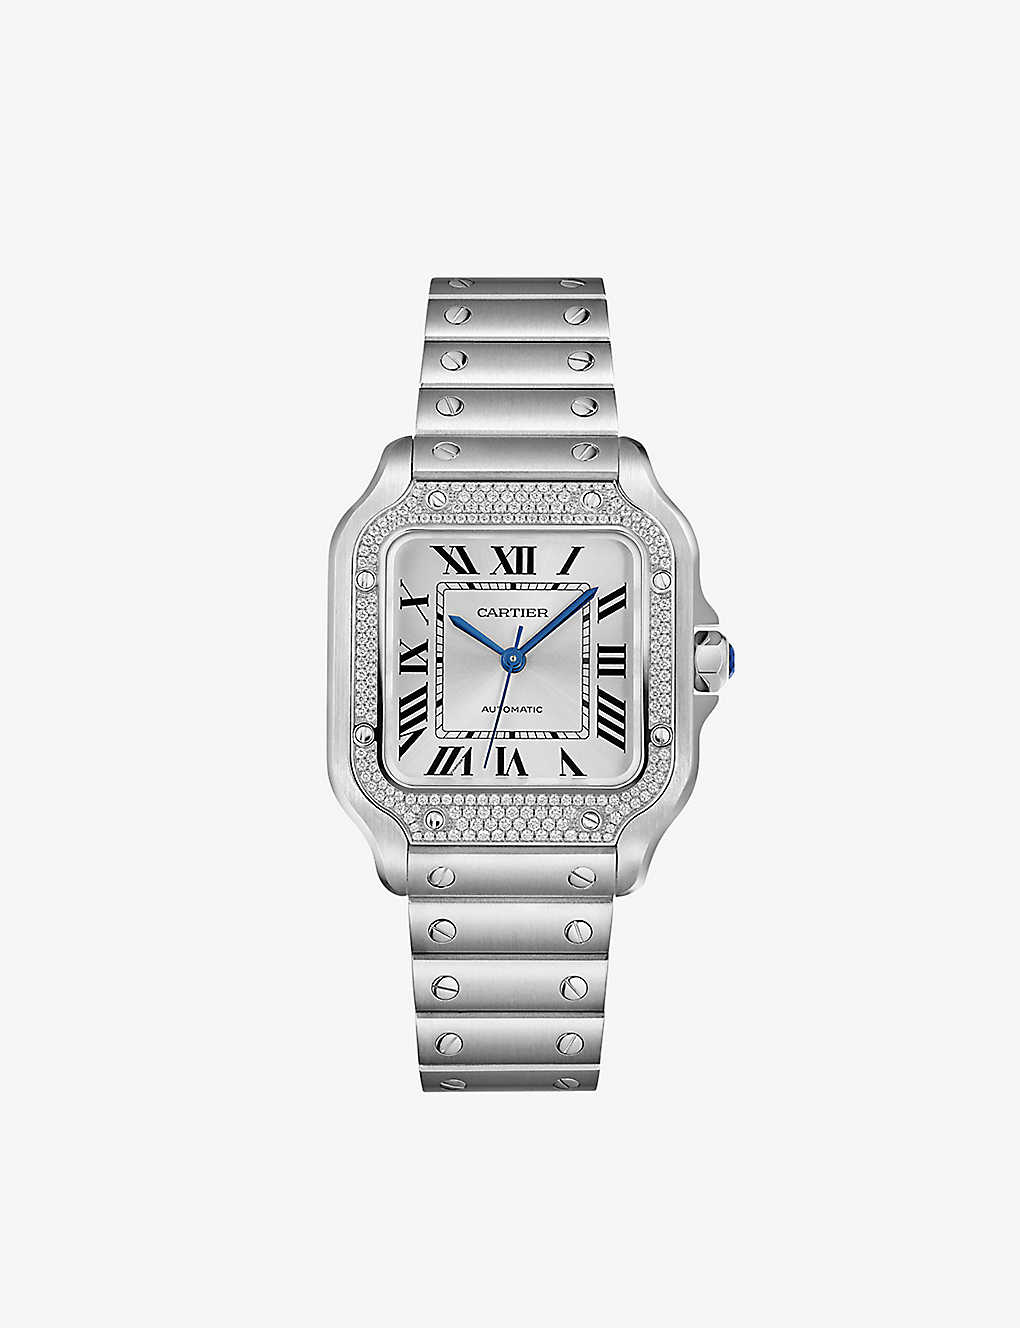 Anine Bing Cartier Watch | peacecommission.kdsg.gov.ng